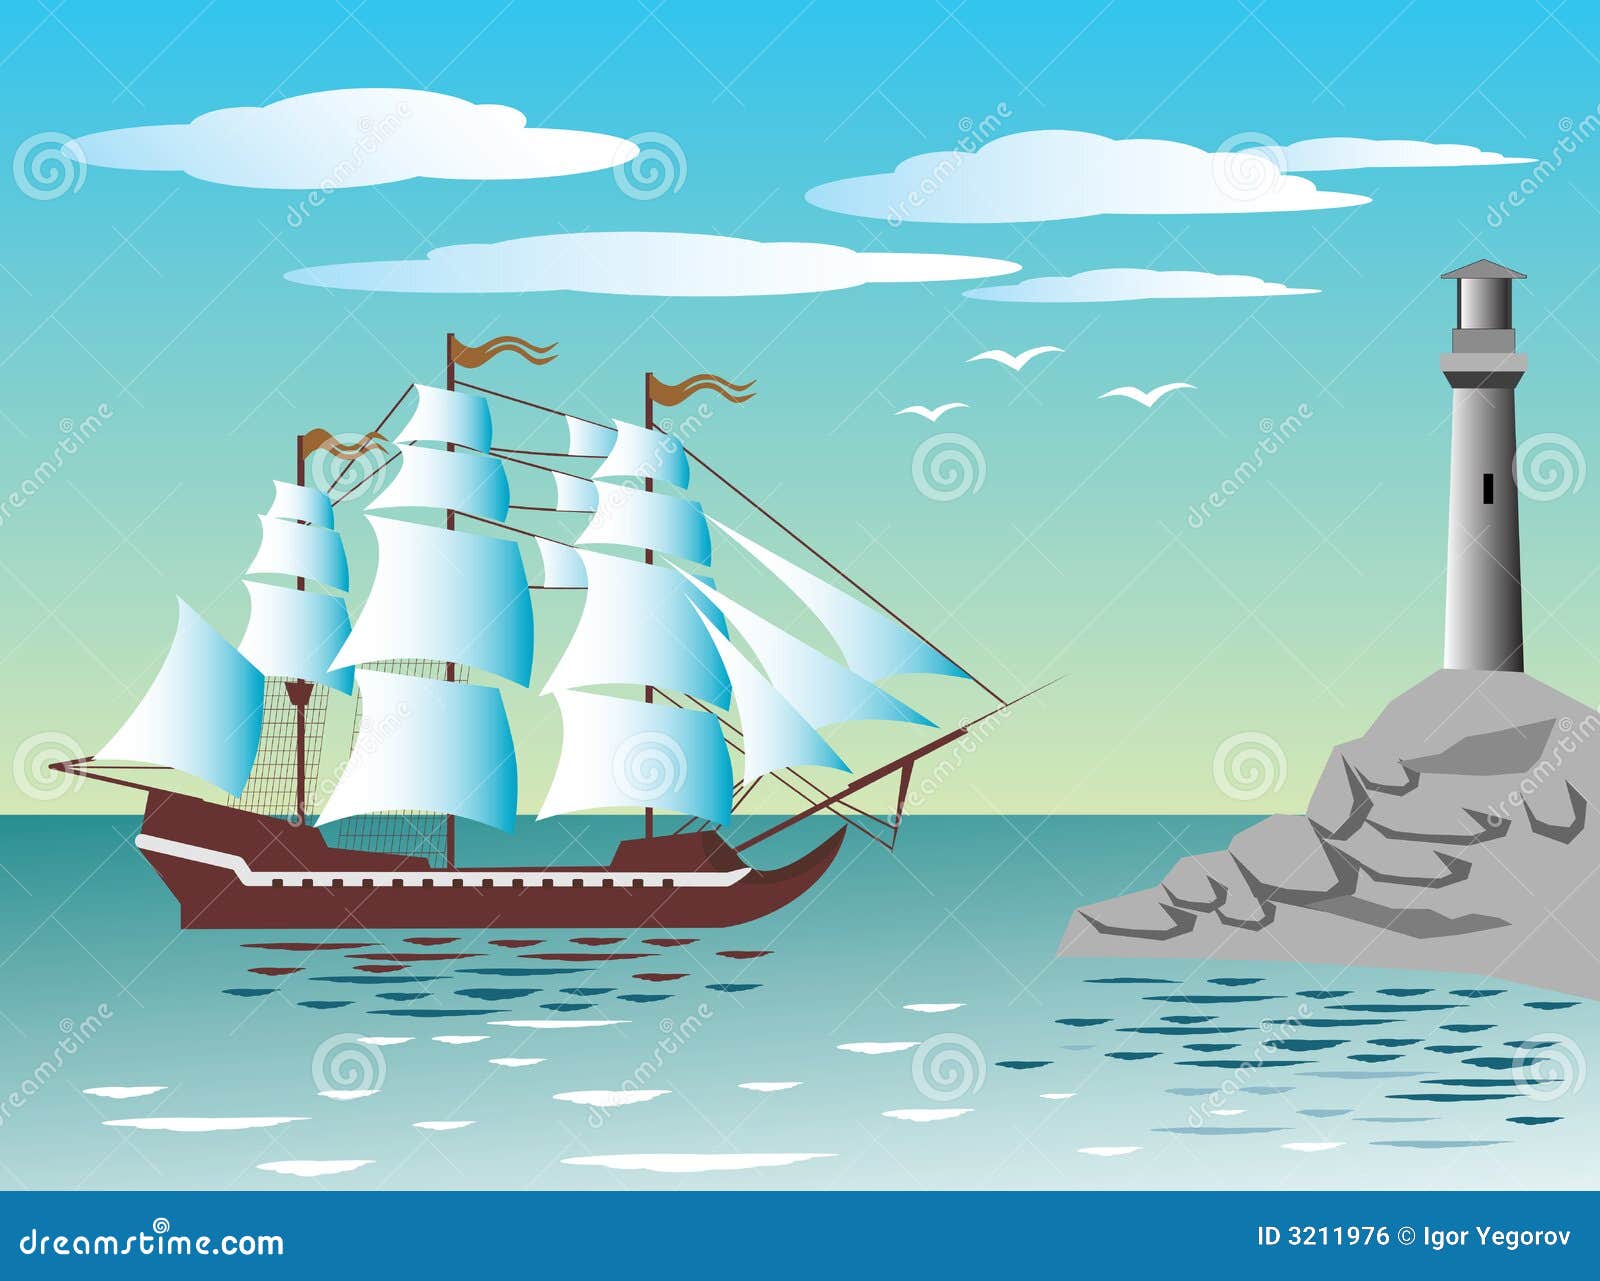 Sailing Ship At The Lighthouse Stock Vector - Image: 3211976